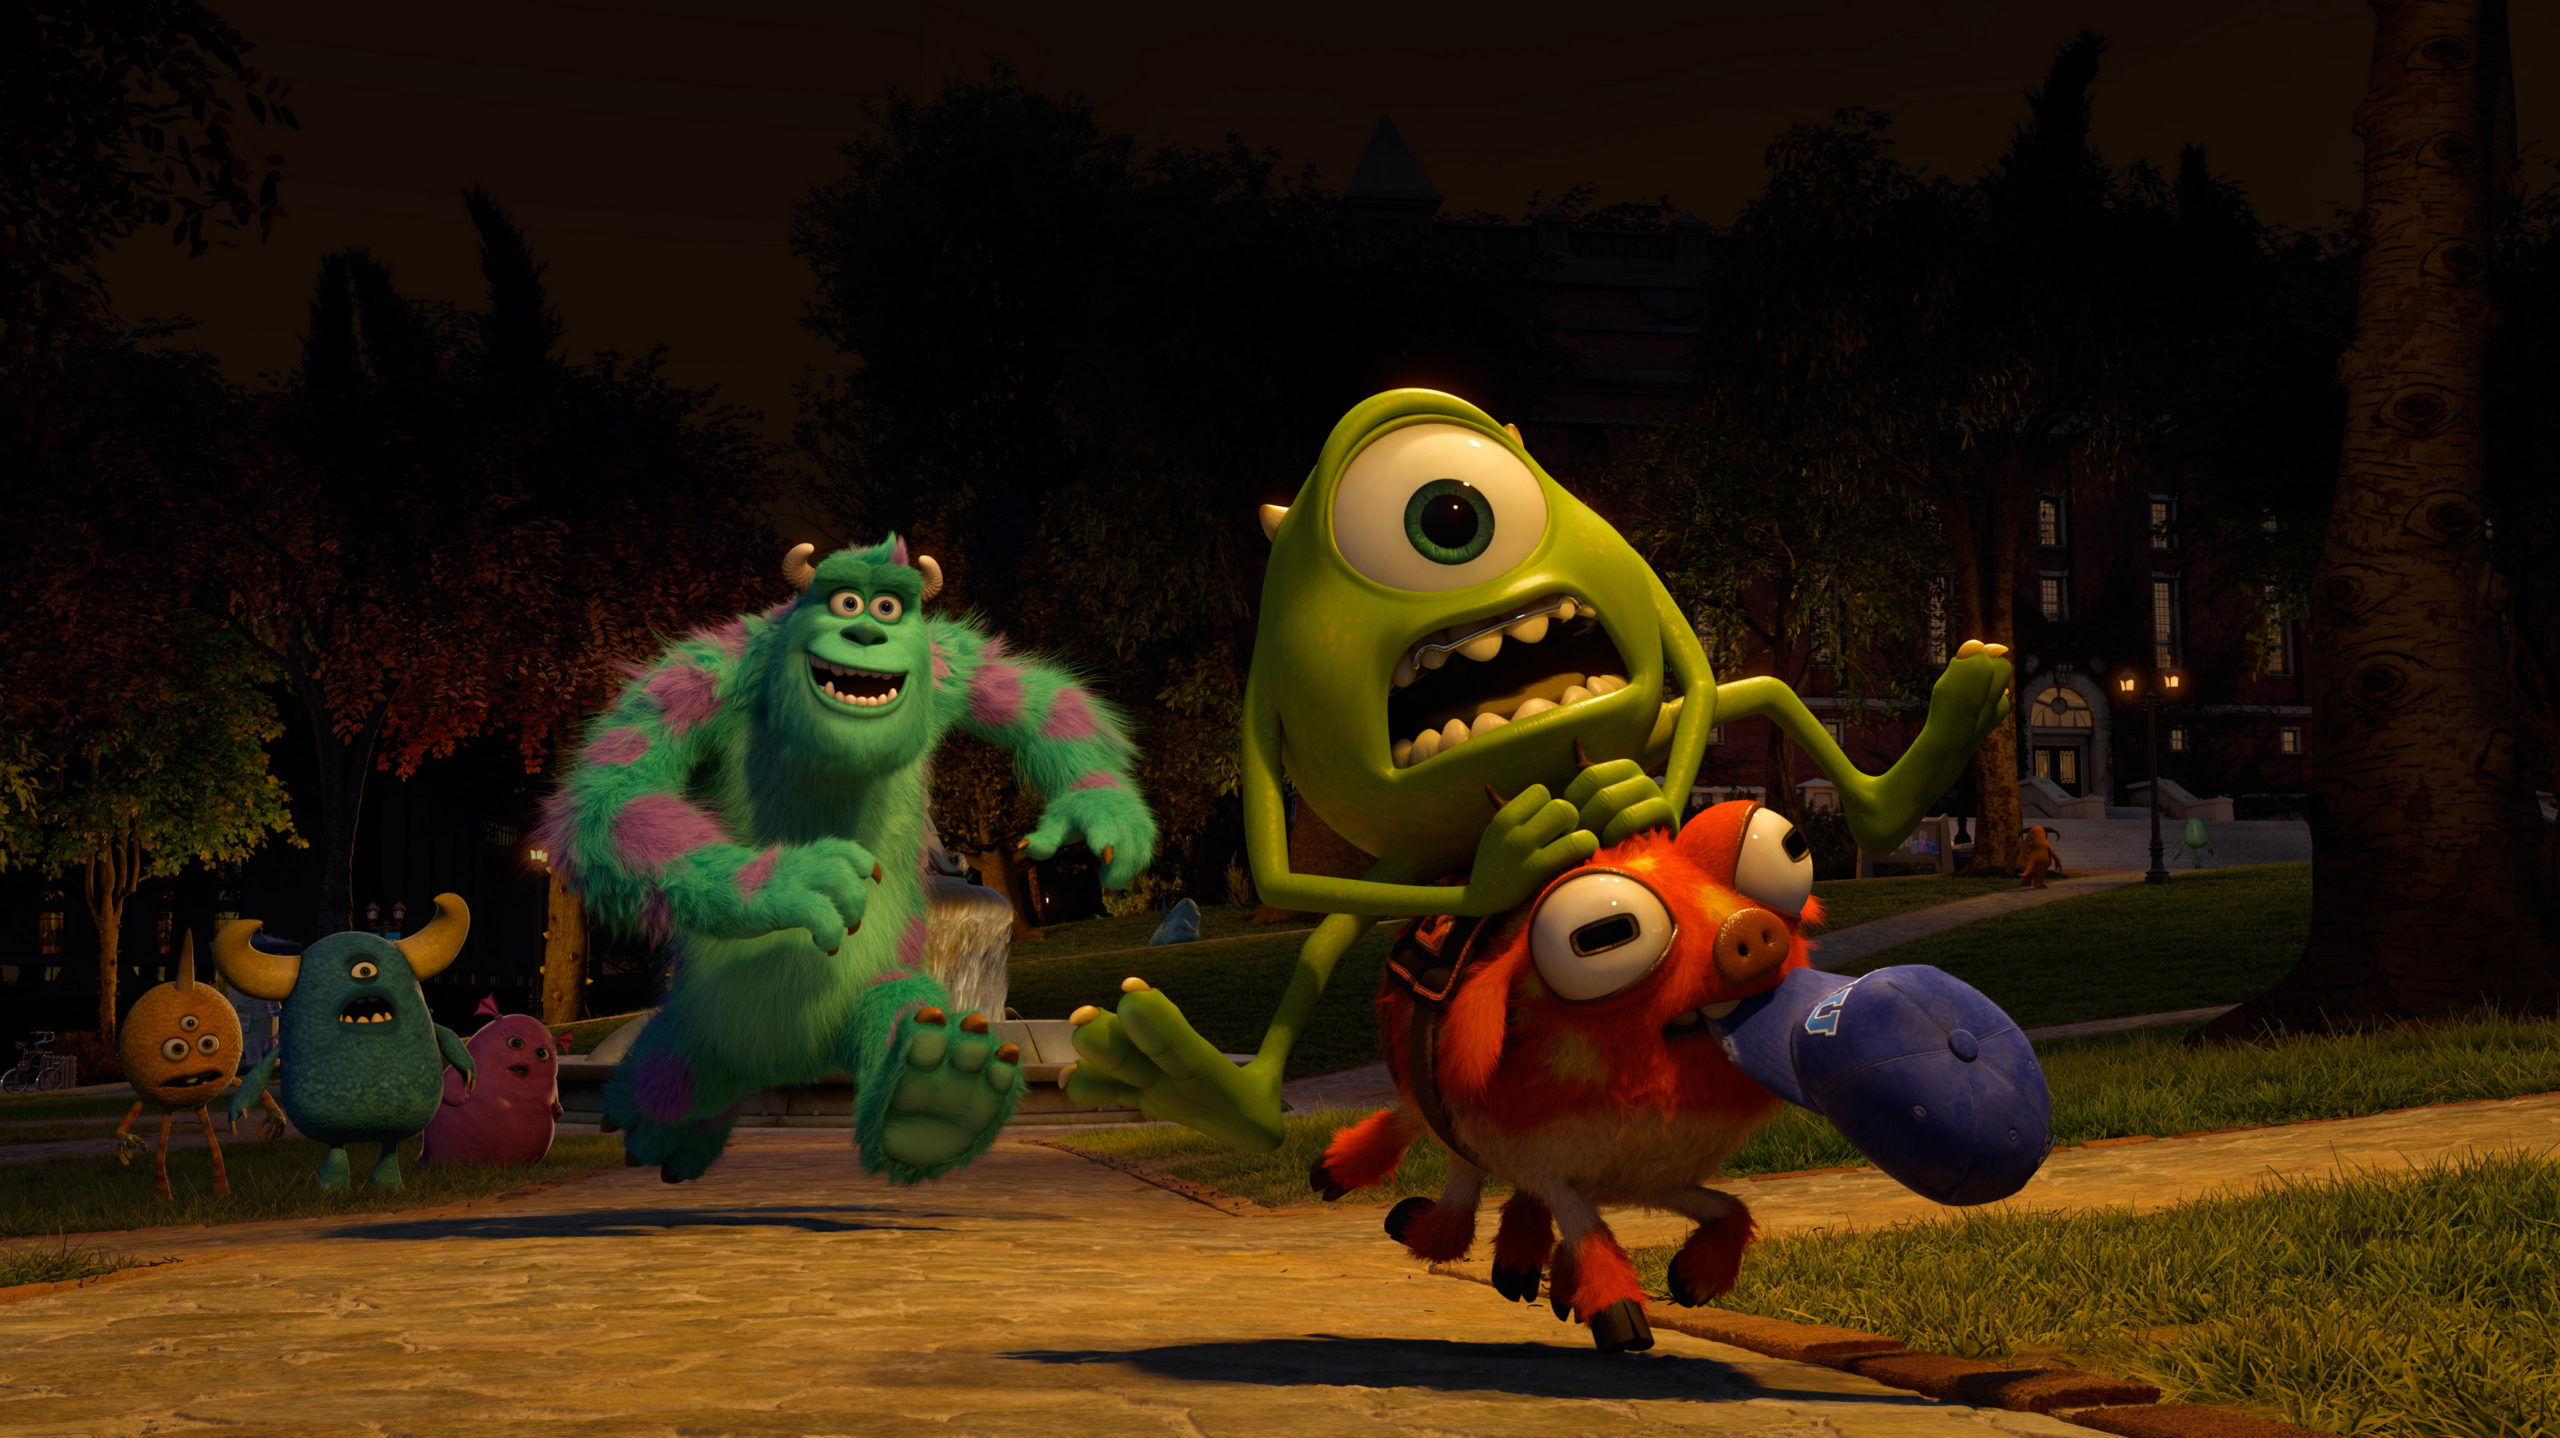 Mike Wazowski might be terrified, but Archie is happy to be along for the ride. (Image: Disney)